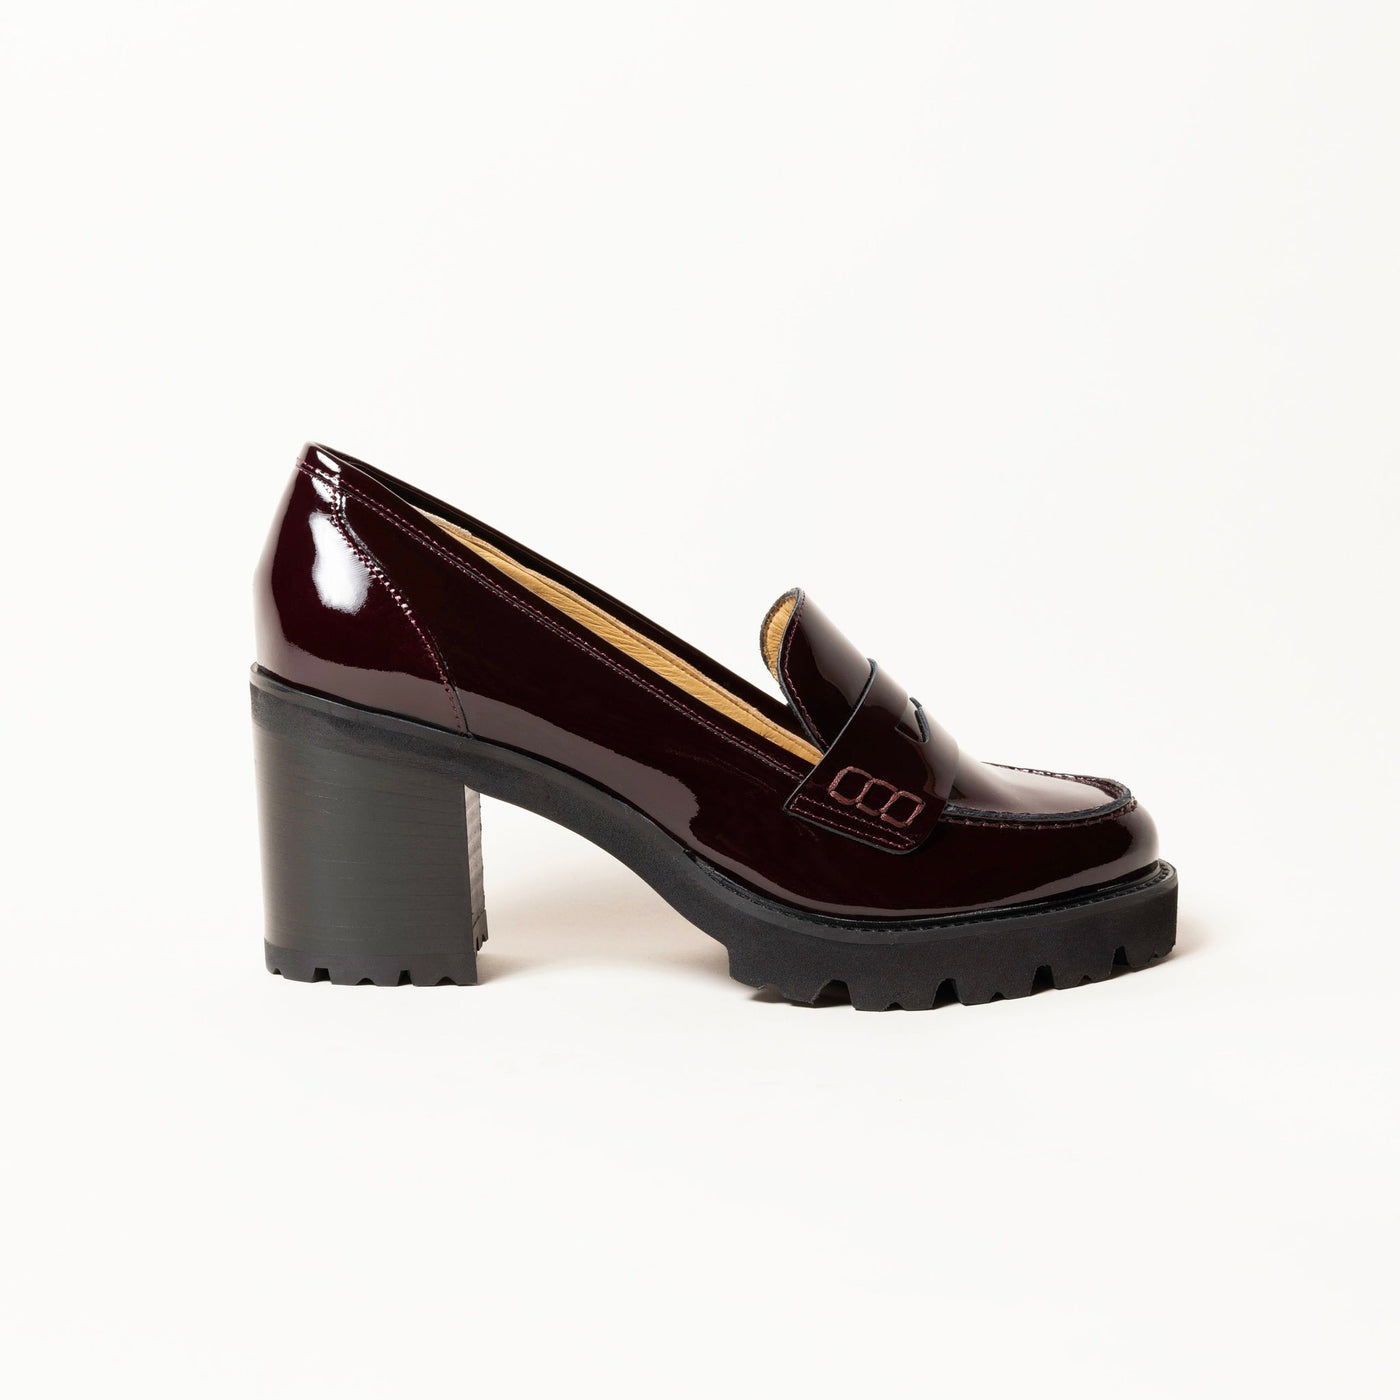 Loafer pumps in burgundy patent leather 